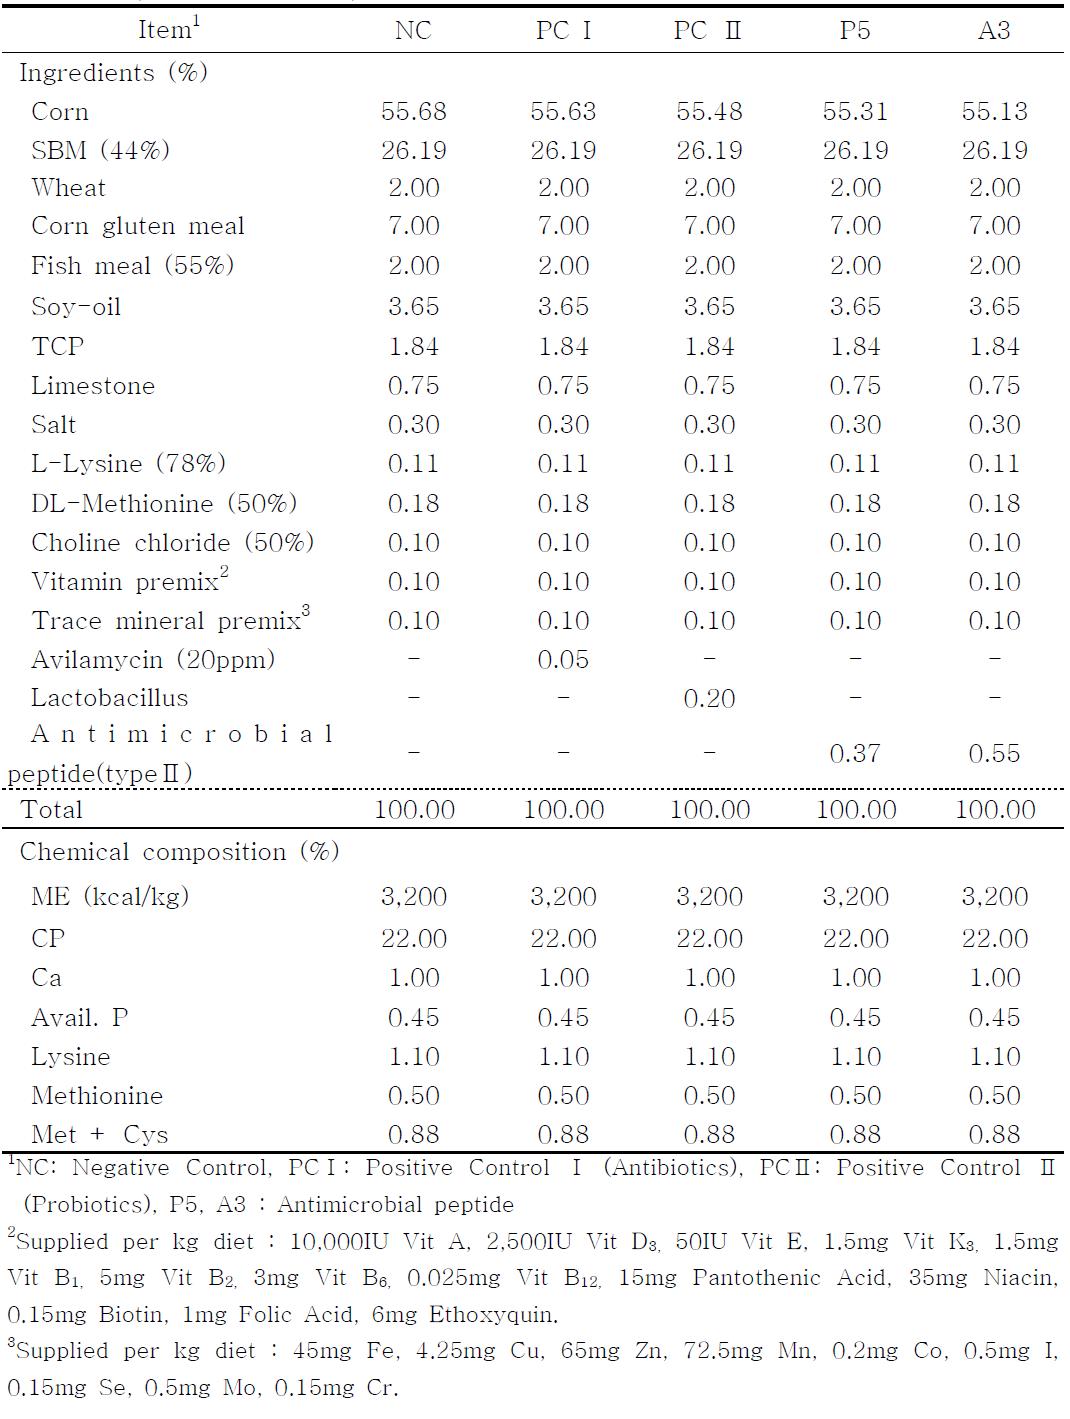 Formula and chemical composition of experimental diets